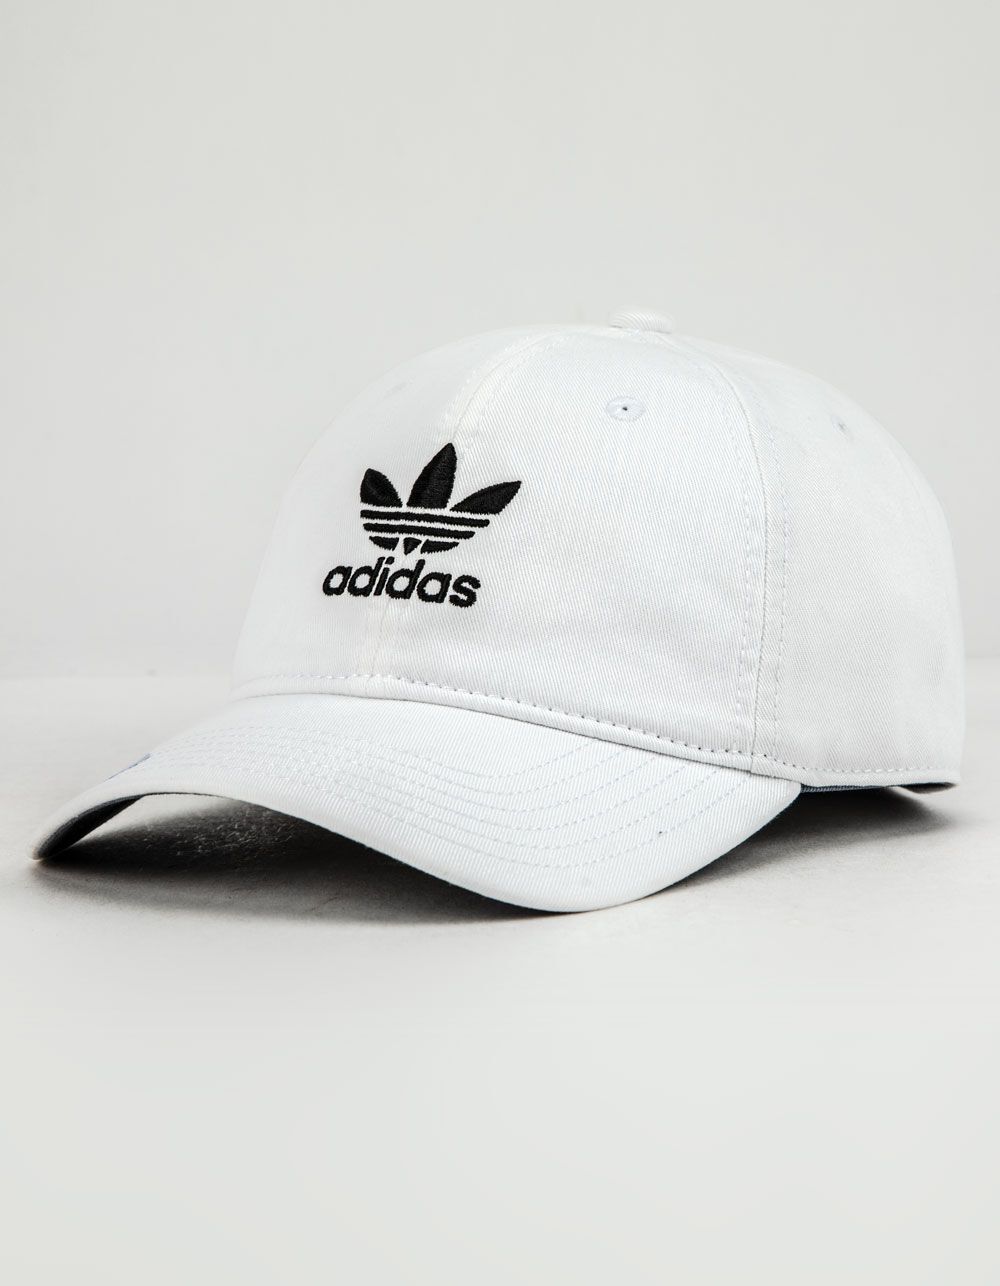 ADIDAS Originals Relaxed White Strapback Hat | Tillys